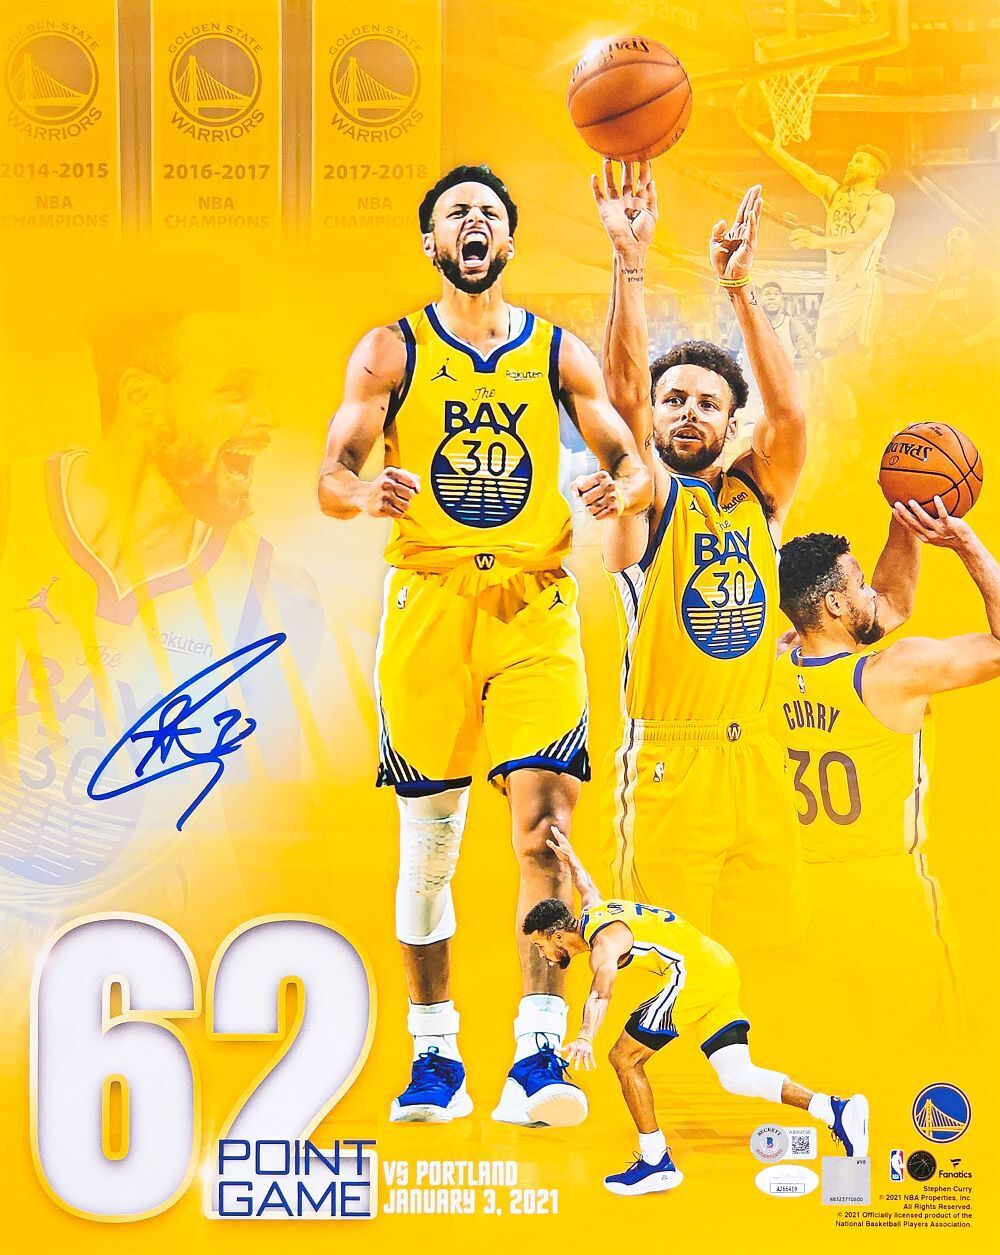 Stephen Curry Signed 16x20 Golden State Warriors 62 Point Game Photo BAS LOA Image 1